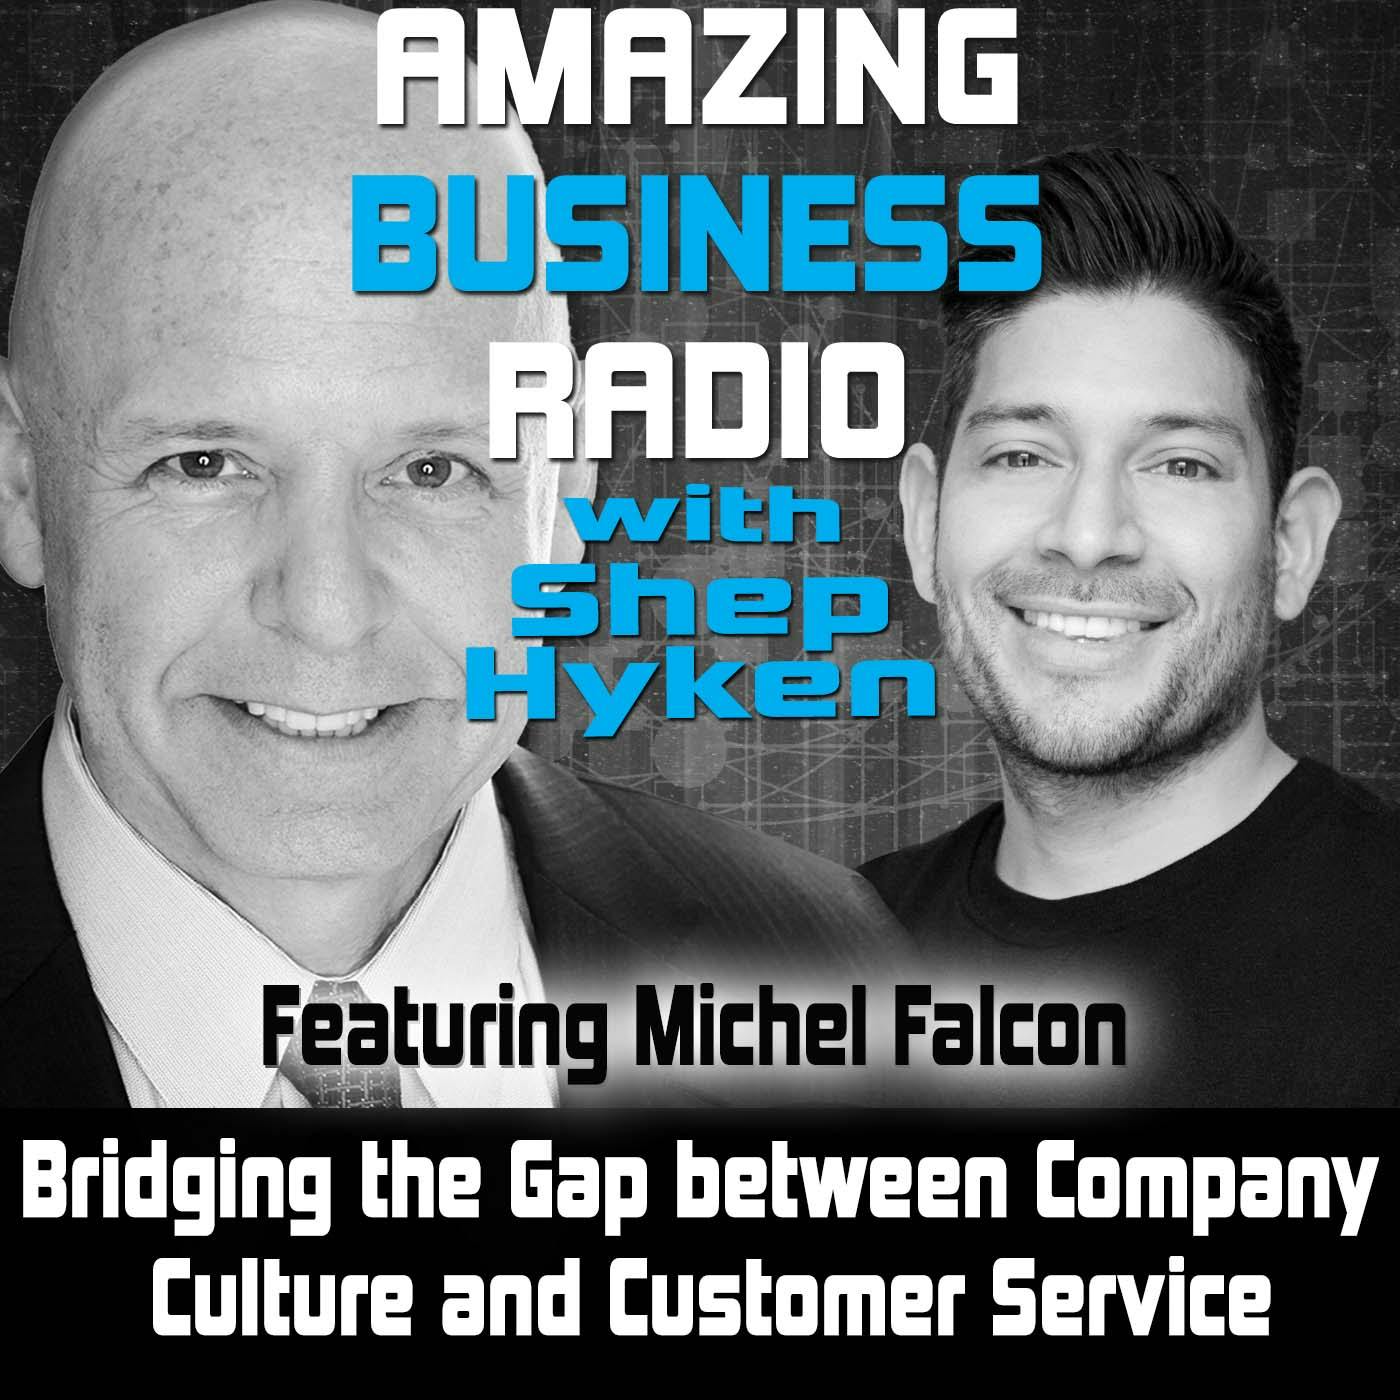 Bridging the Gap between Company Culture and Customer Service Featuring Michel Falcon